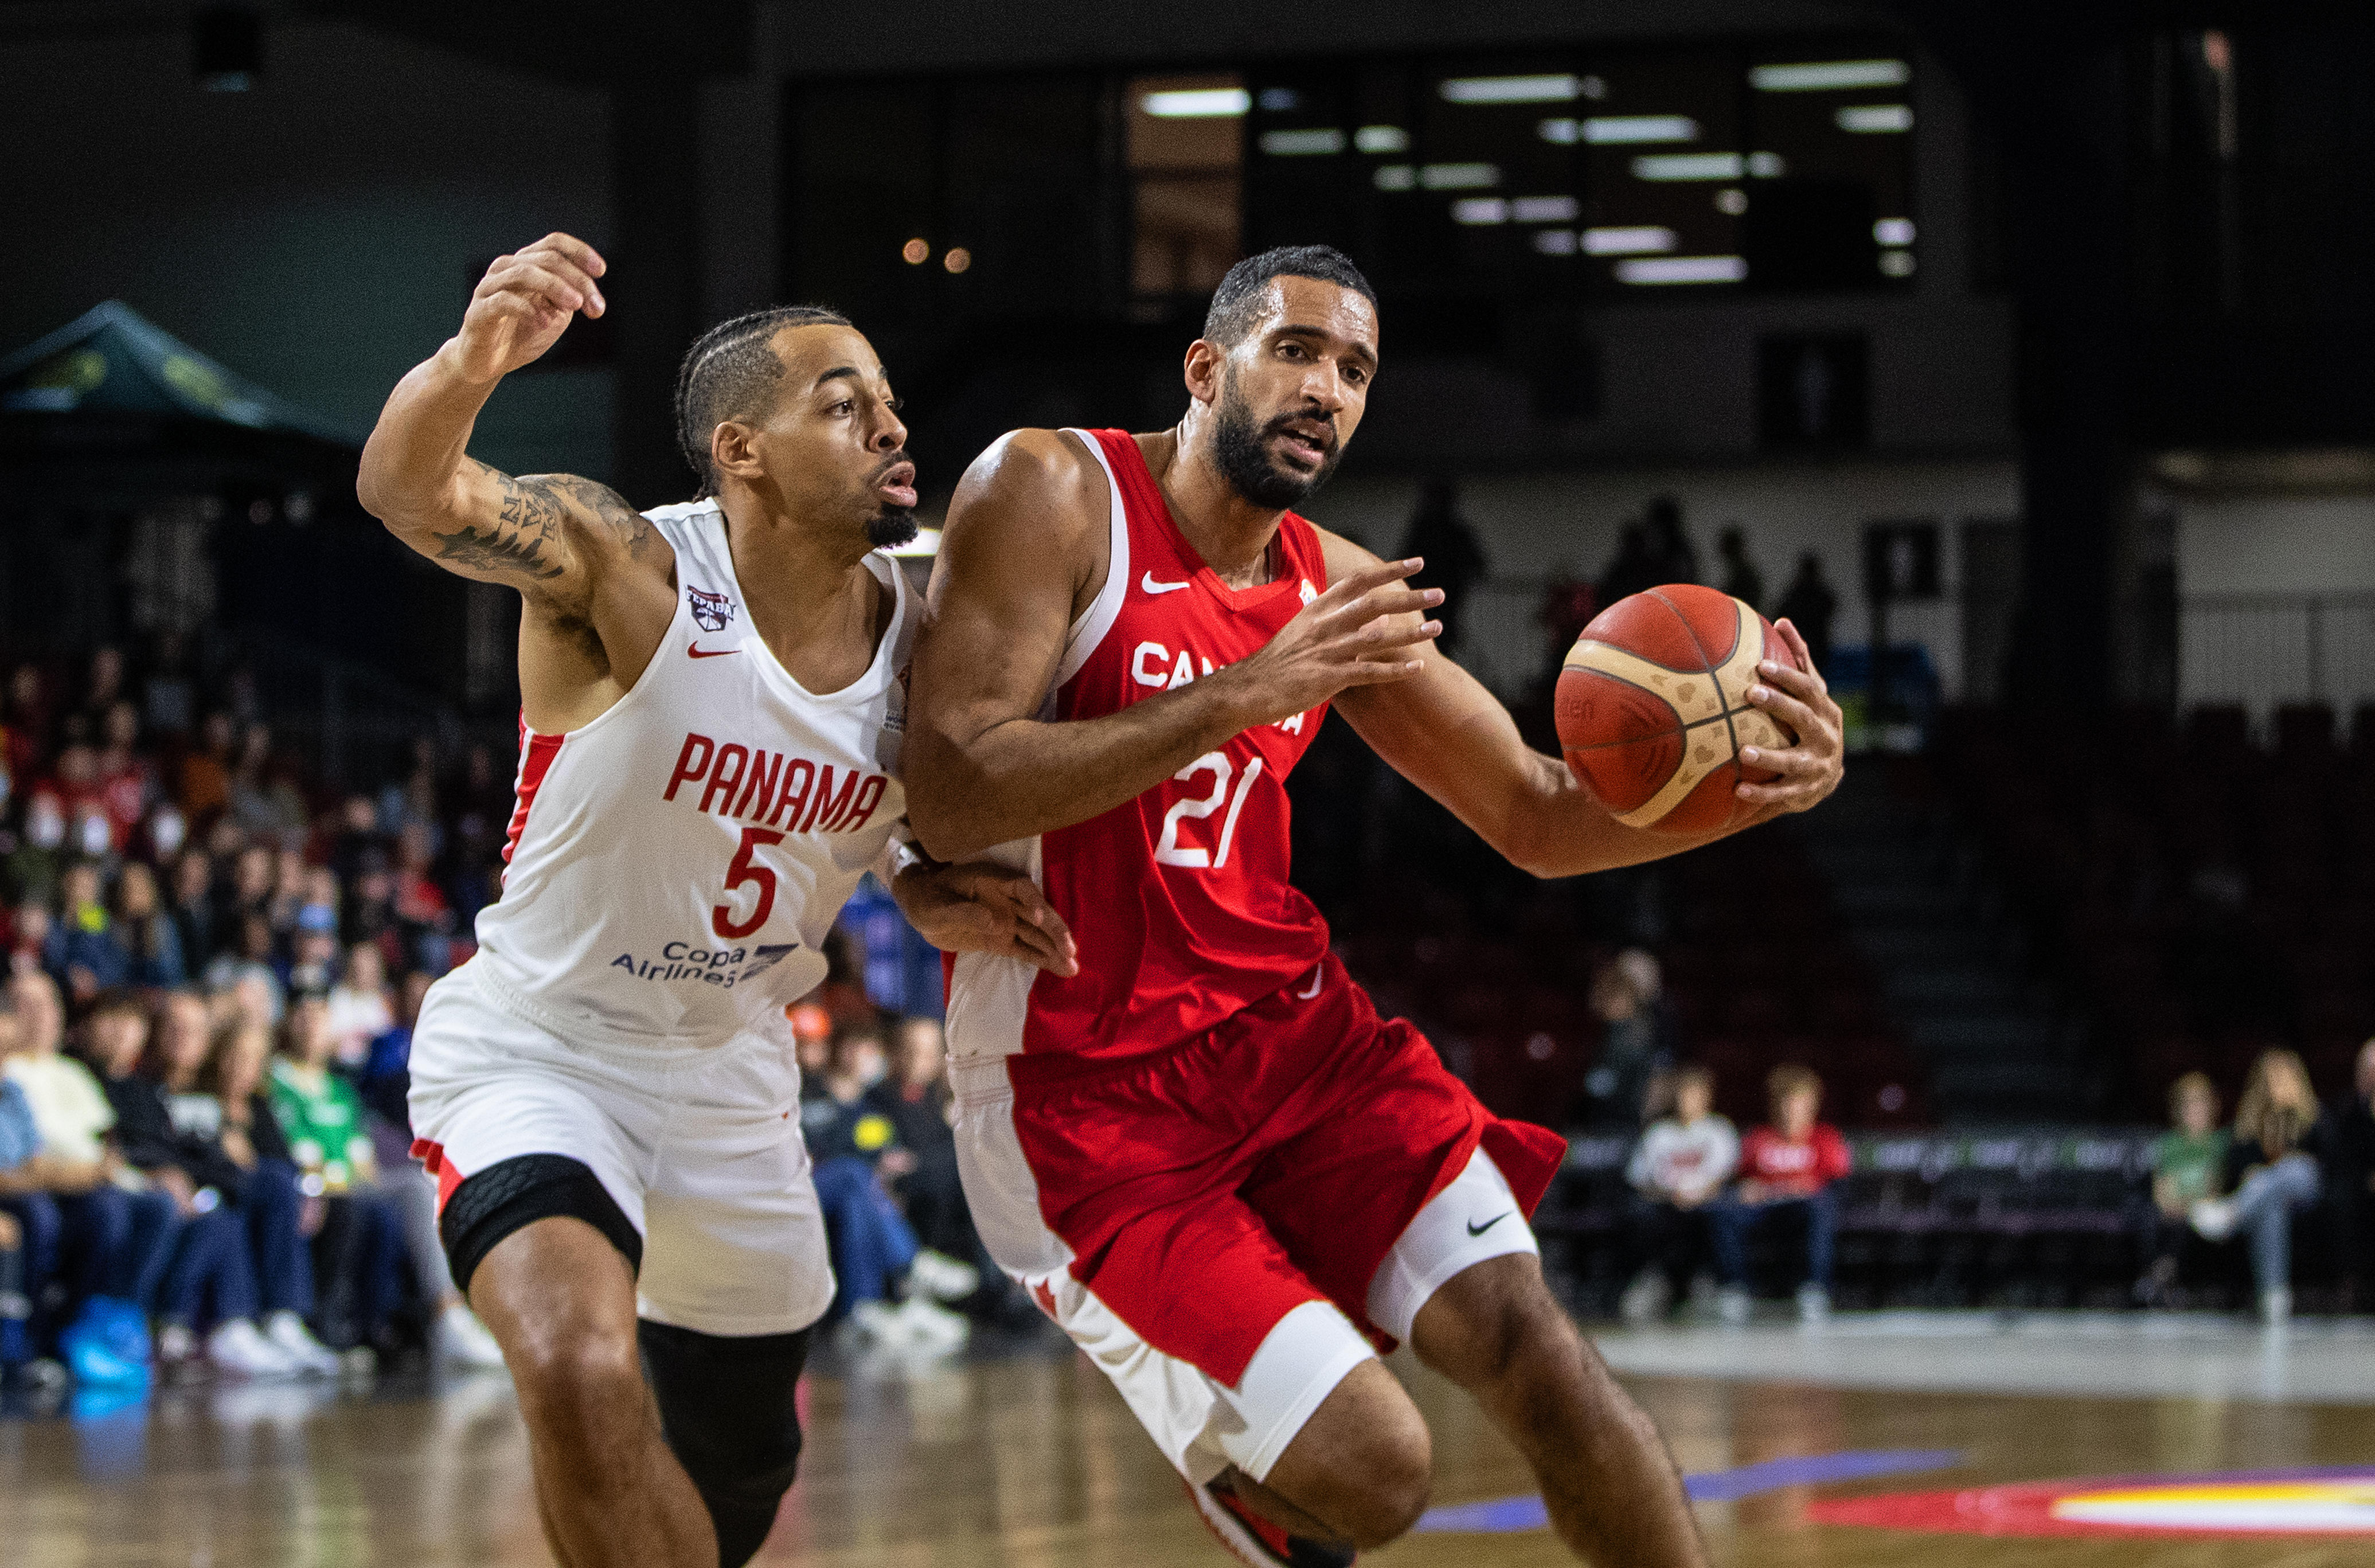 Canadian men's basketball team clinches Olympic berth en route to